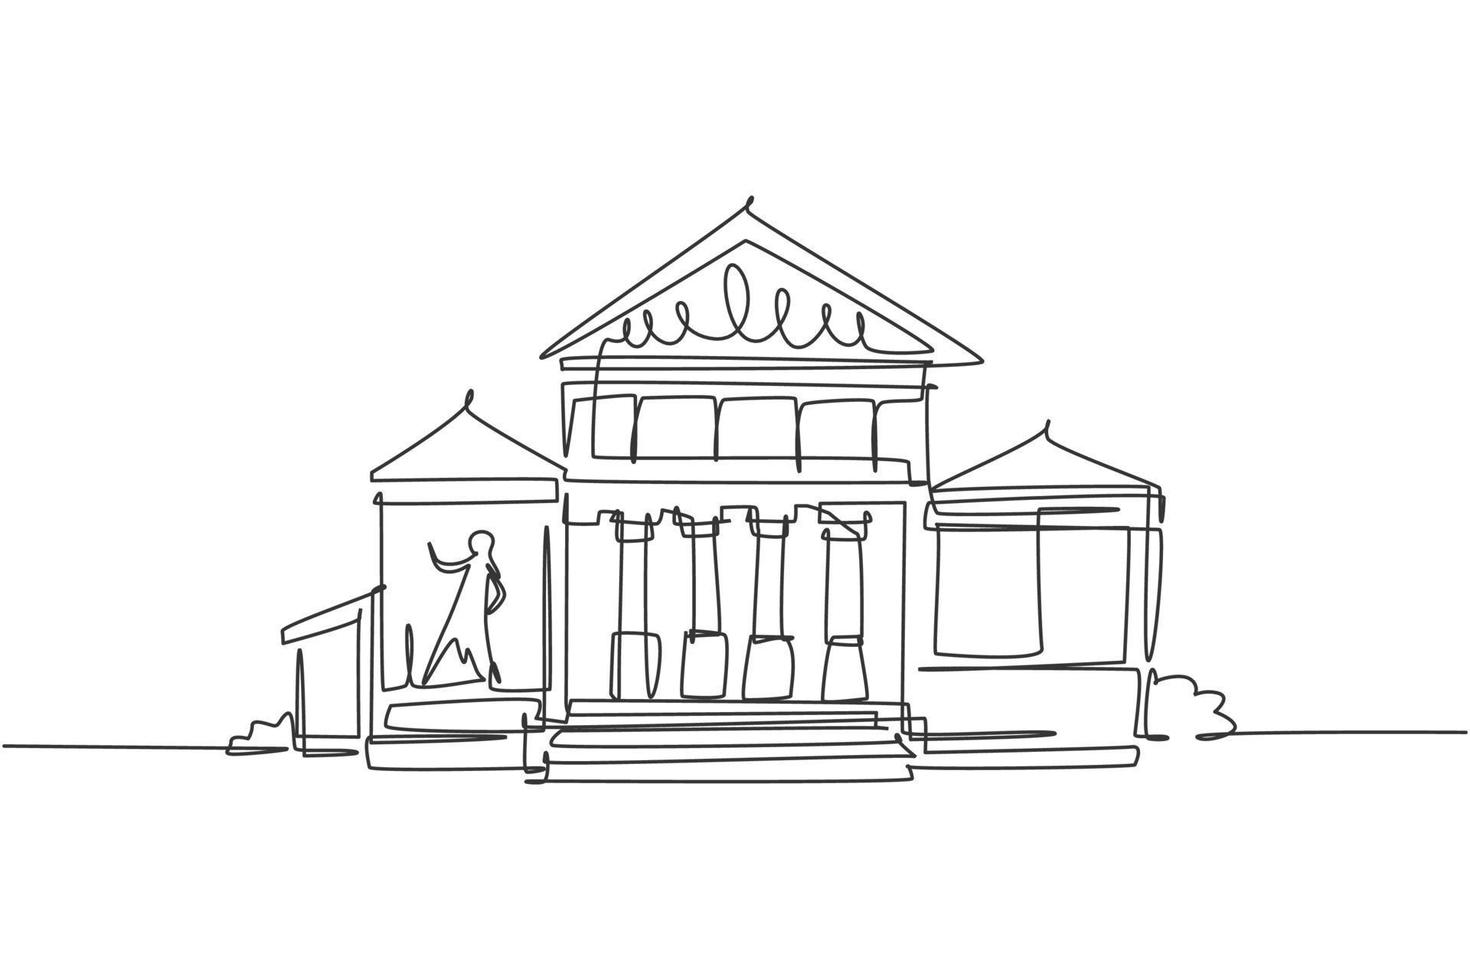 Exhibition Stand Graphic Interior Black White Sketch Illustration Vector  Stock Illustration - Download Image Now - iStock